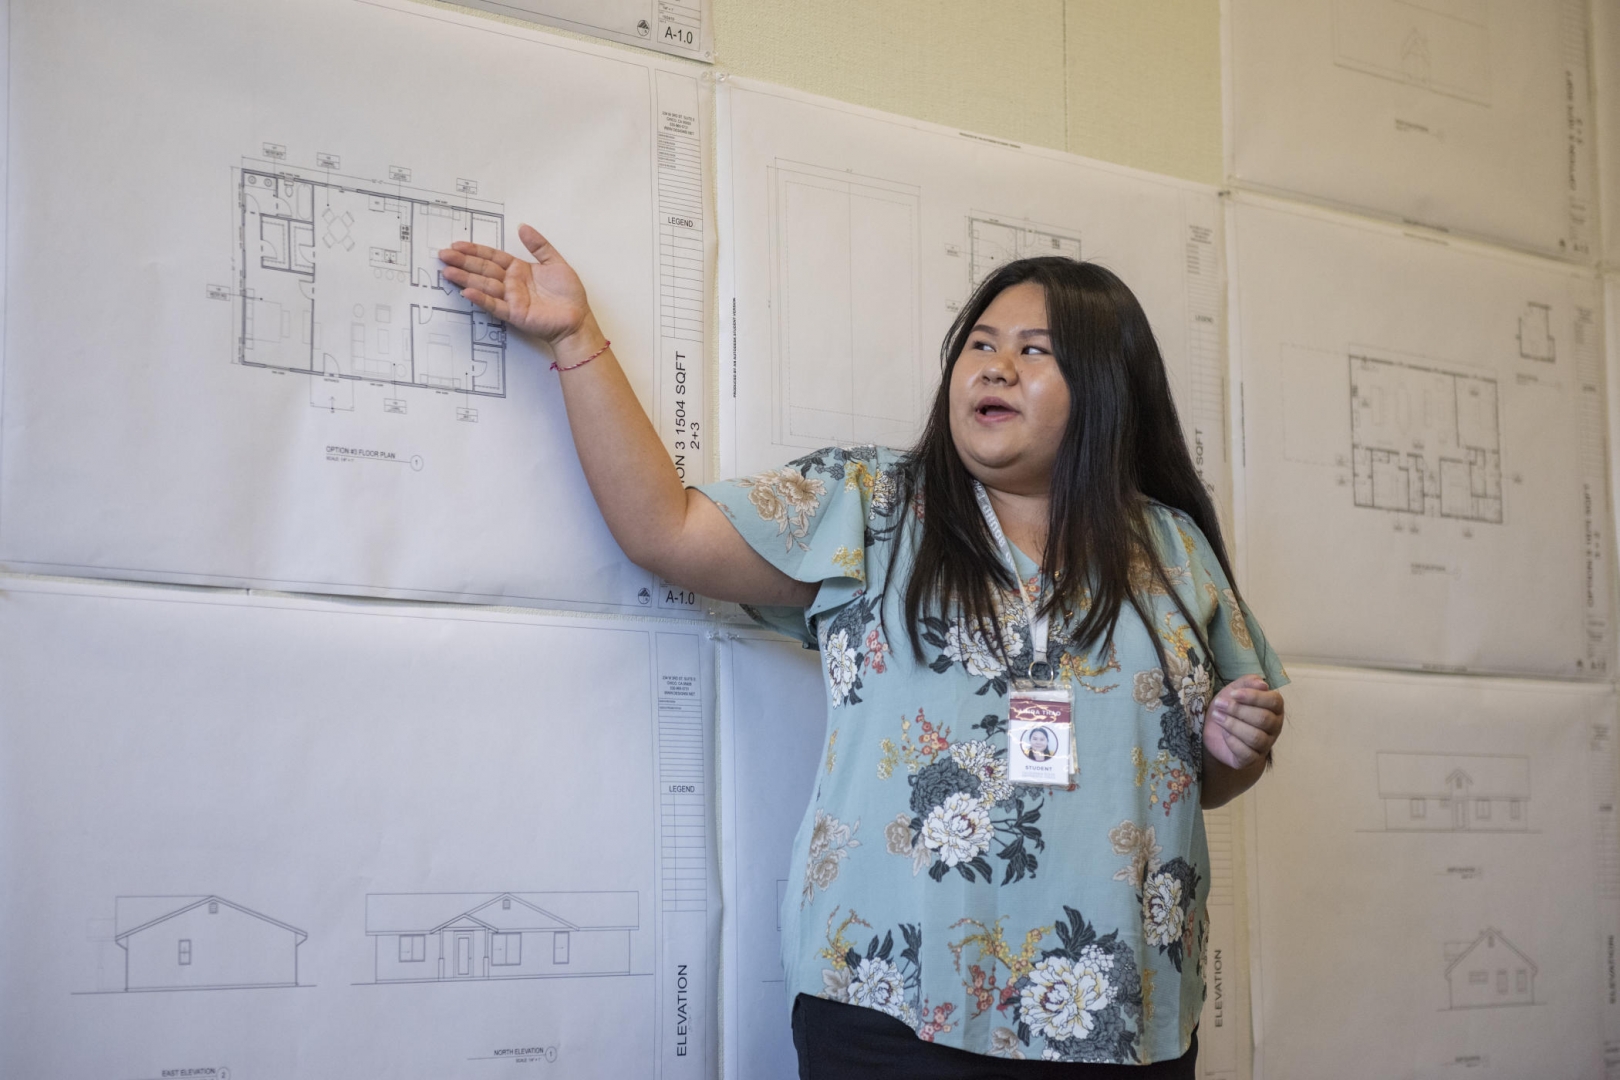 Linda Thao gestures to designs of houses sketched onto paper that is on a wall as she talks about them.